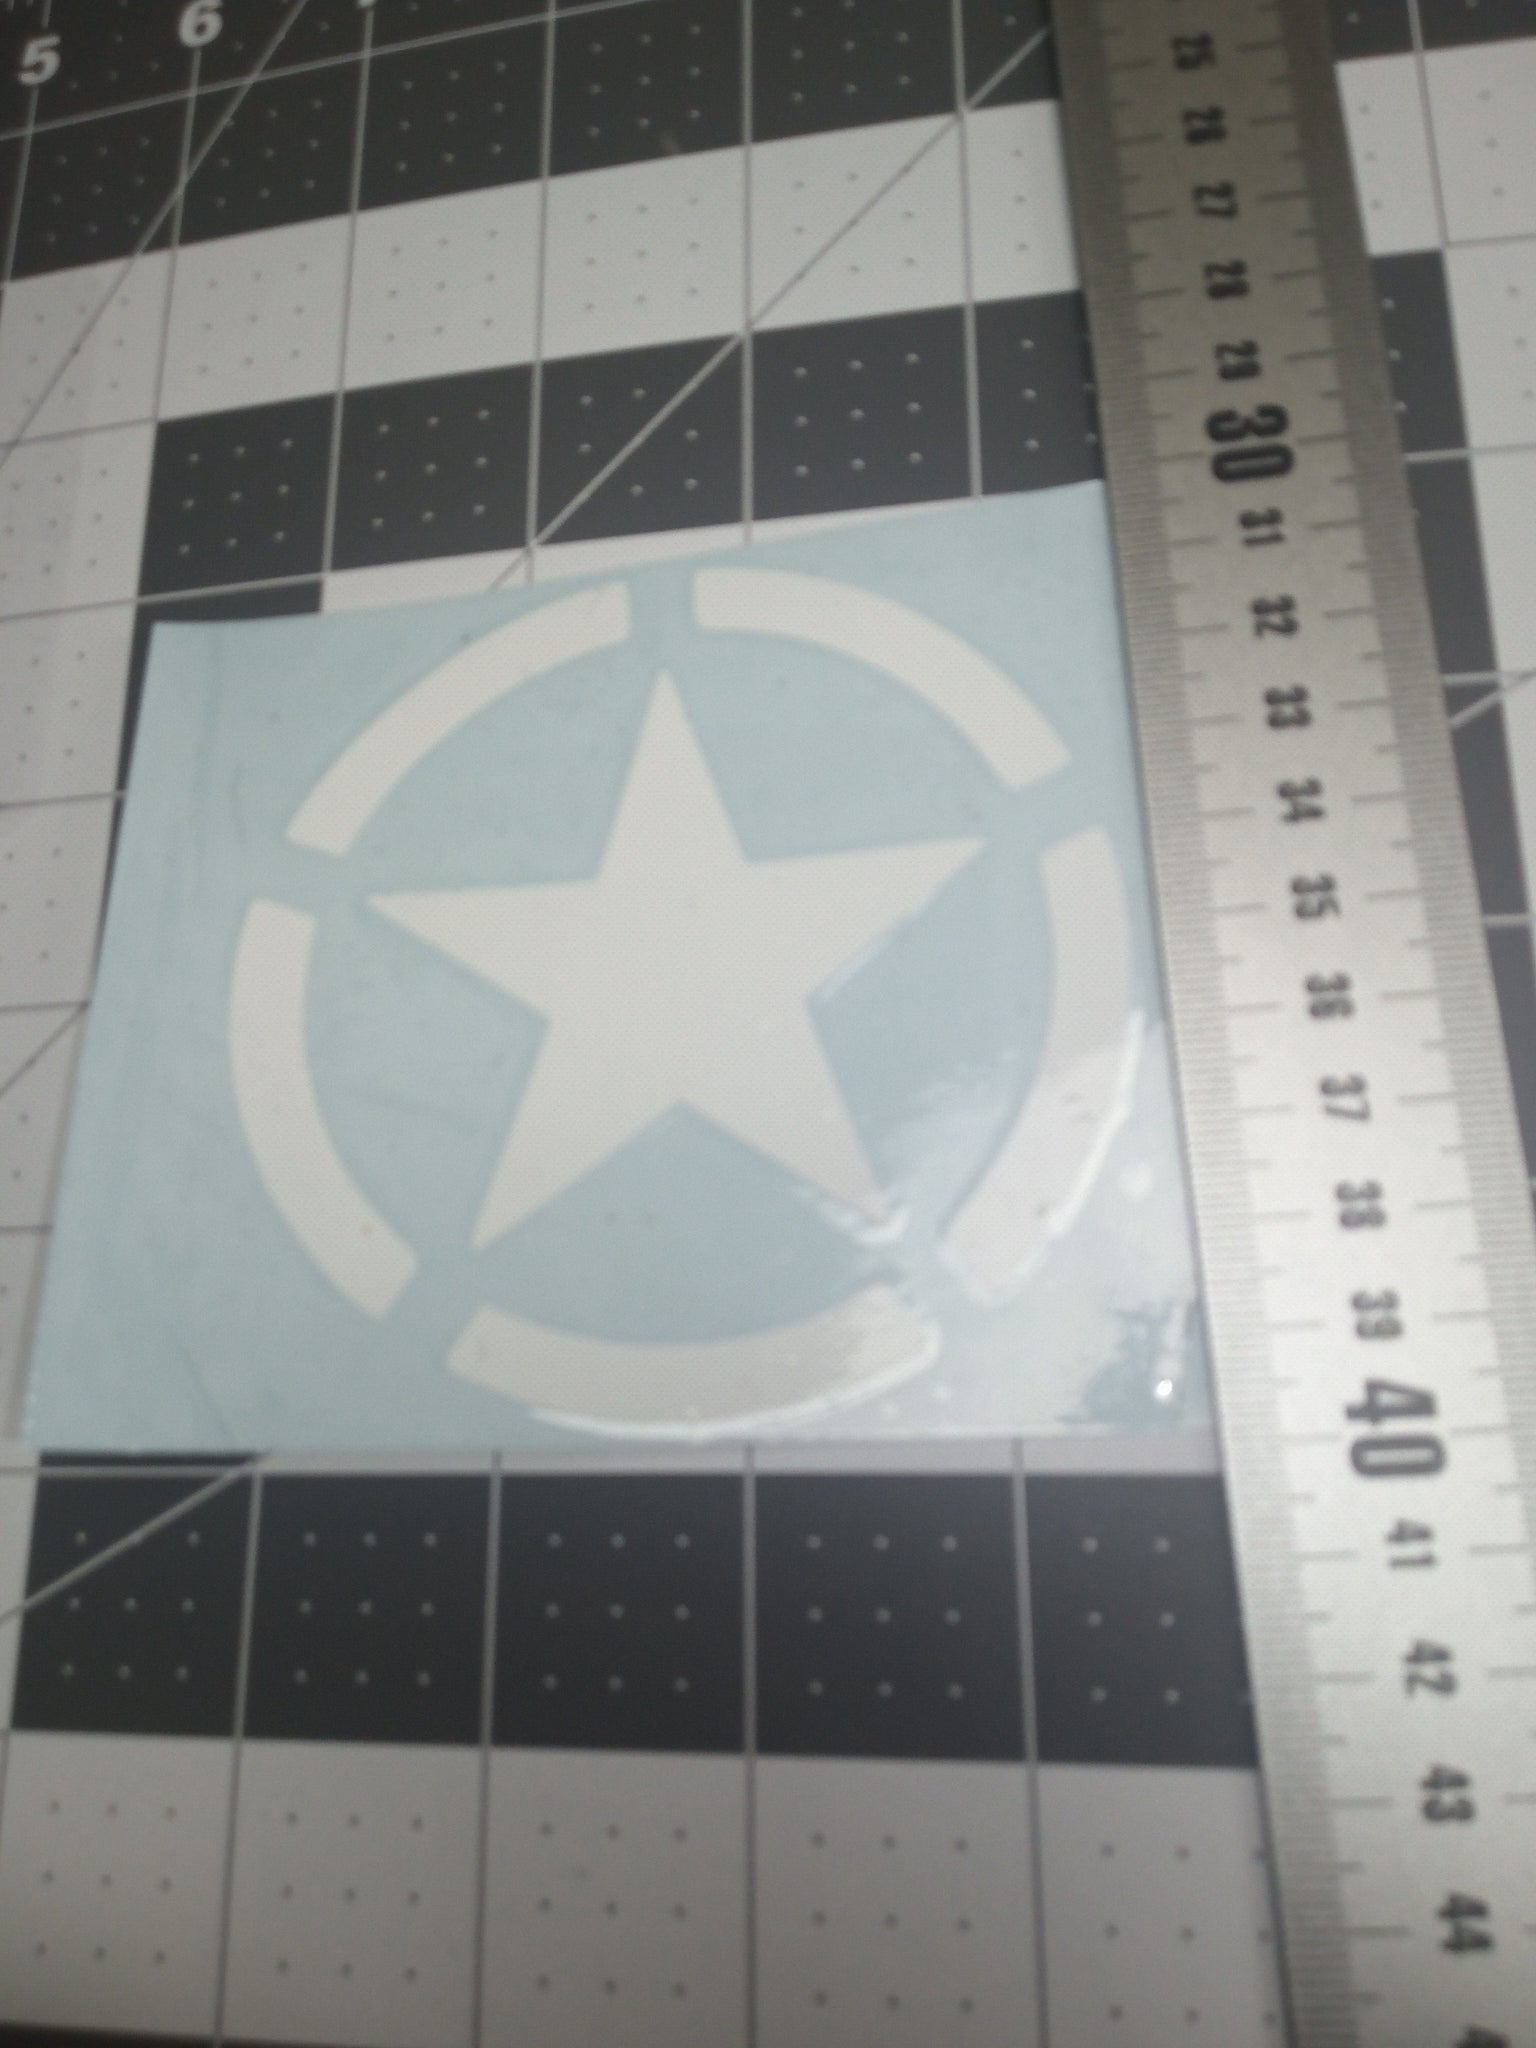 Military star decal